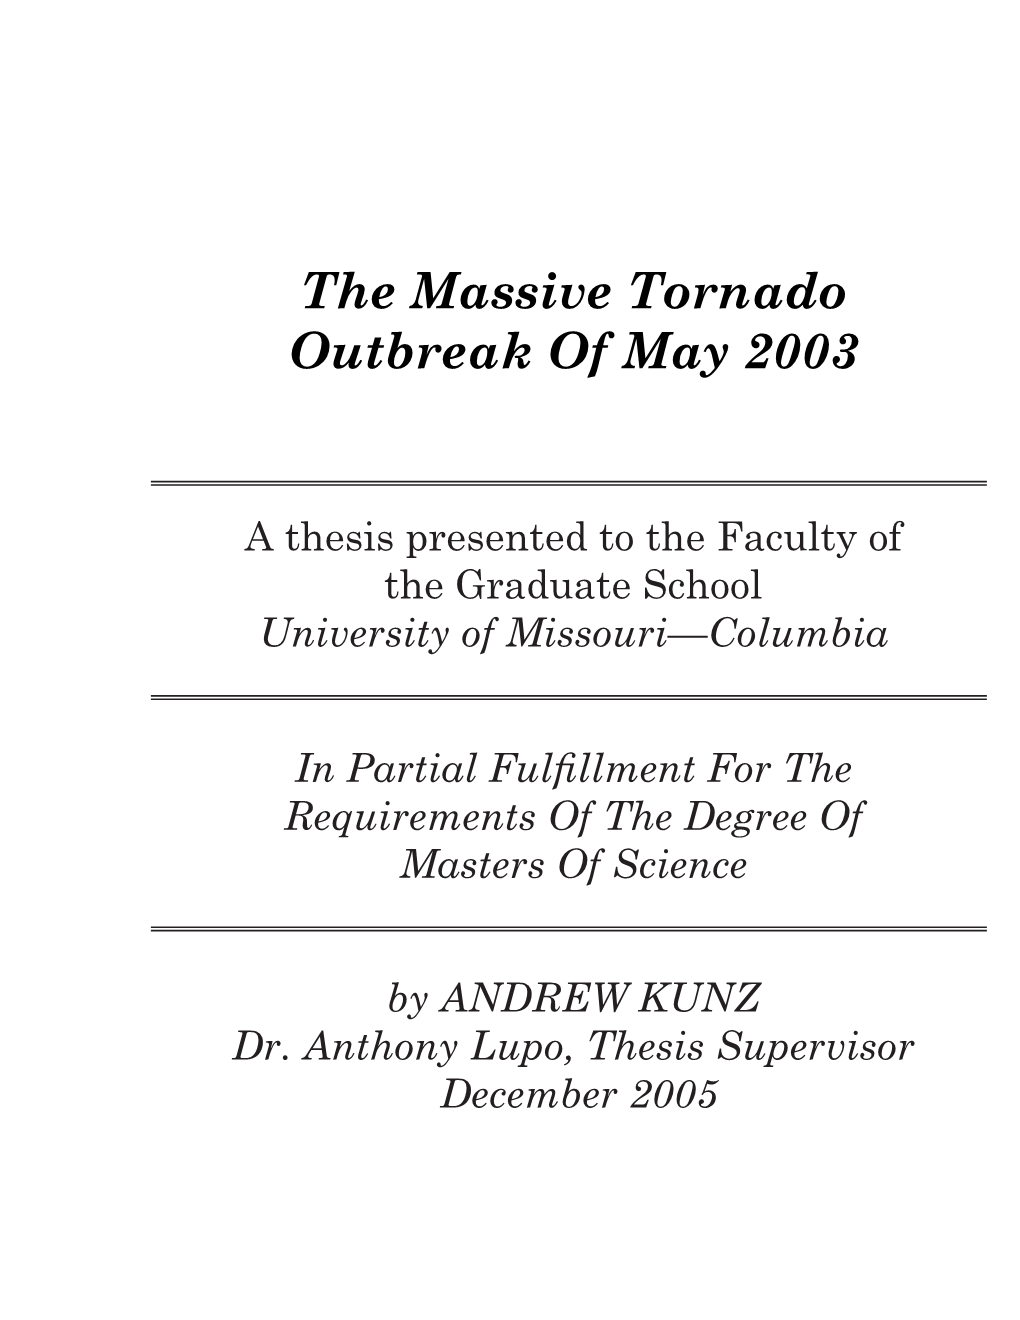 The Massive Tornado Outbreak of May 2003